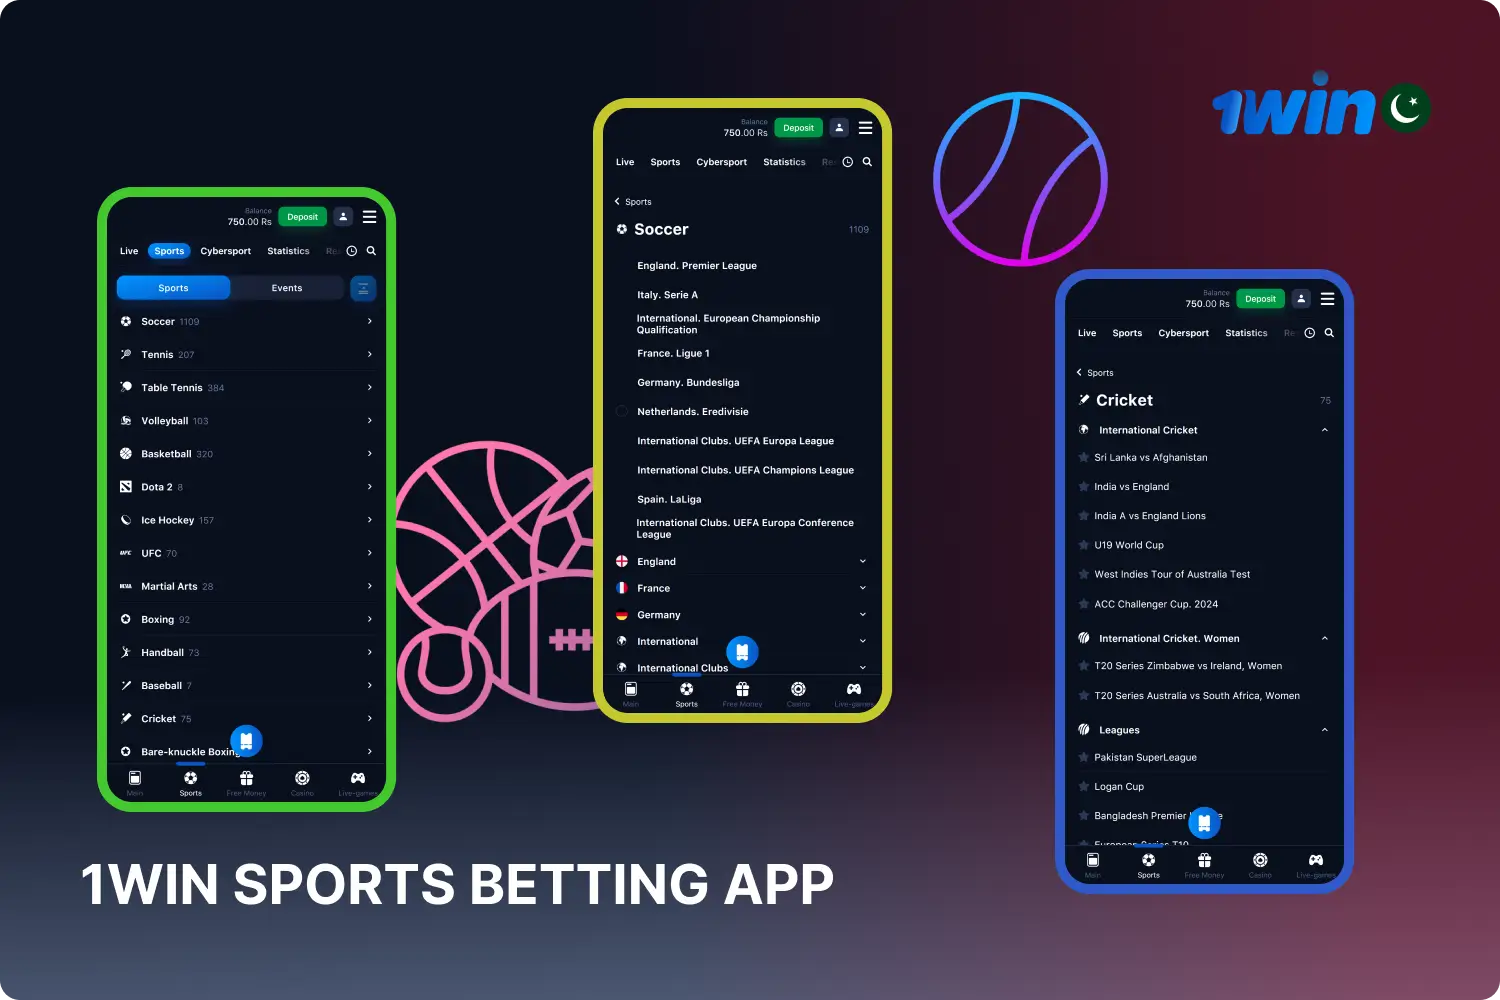 Betting on sports in Pakistan is much more convenient with the 1win sports betting app mobile app for Android and iOS